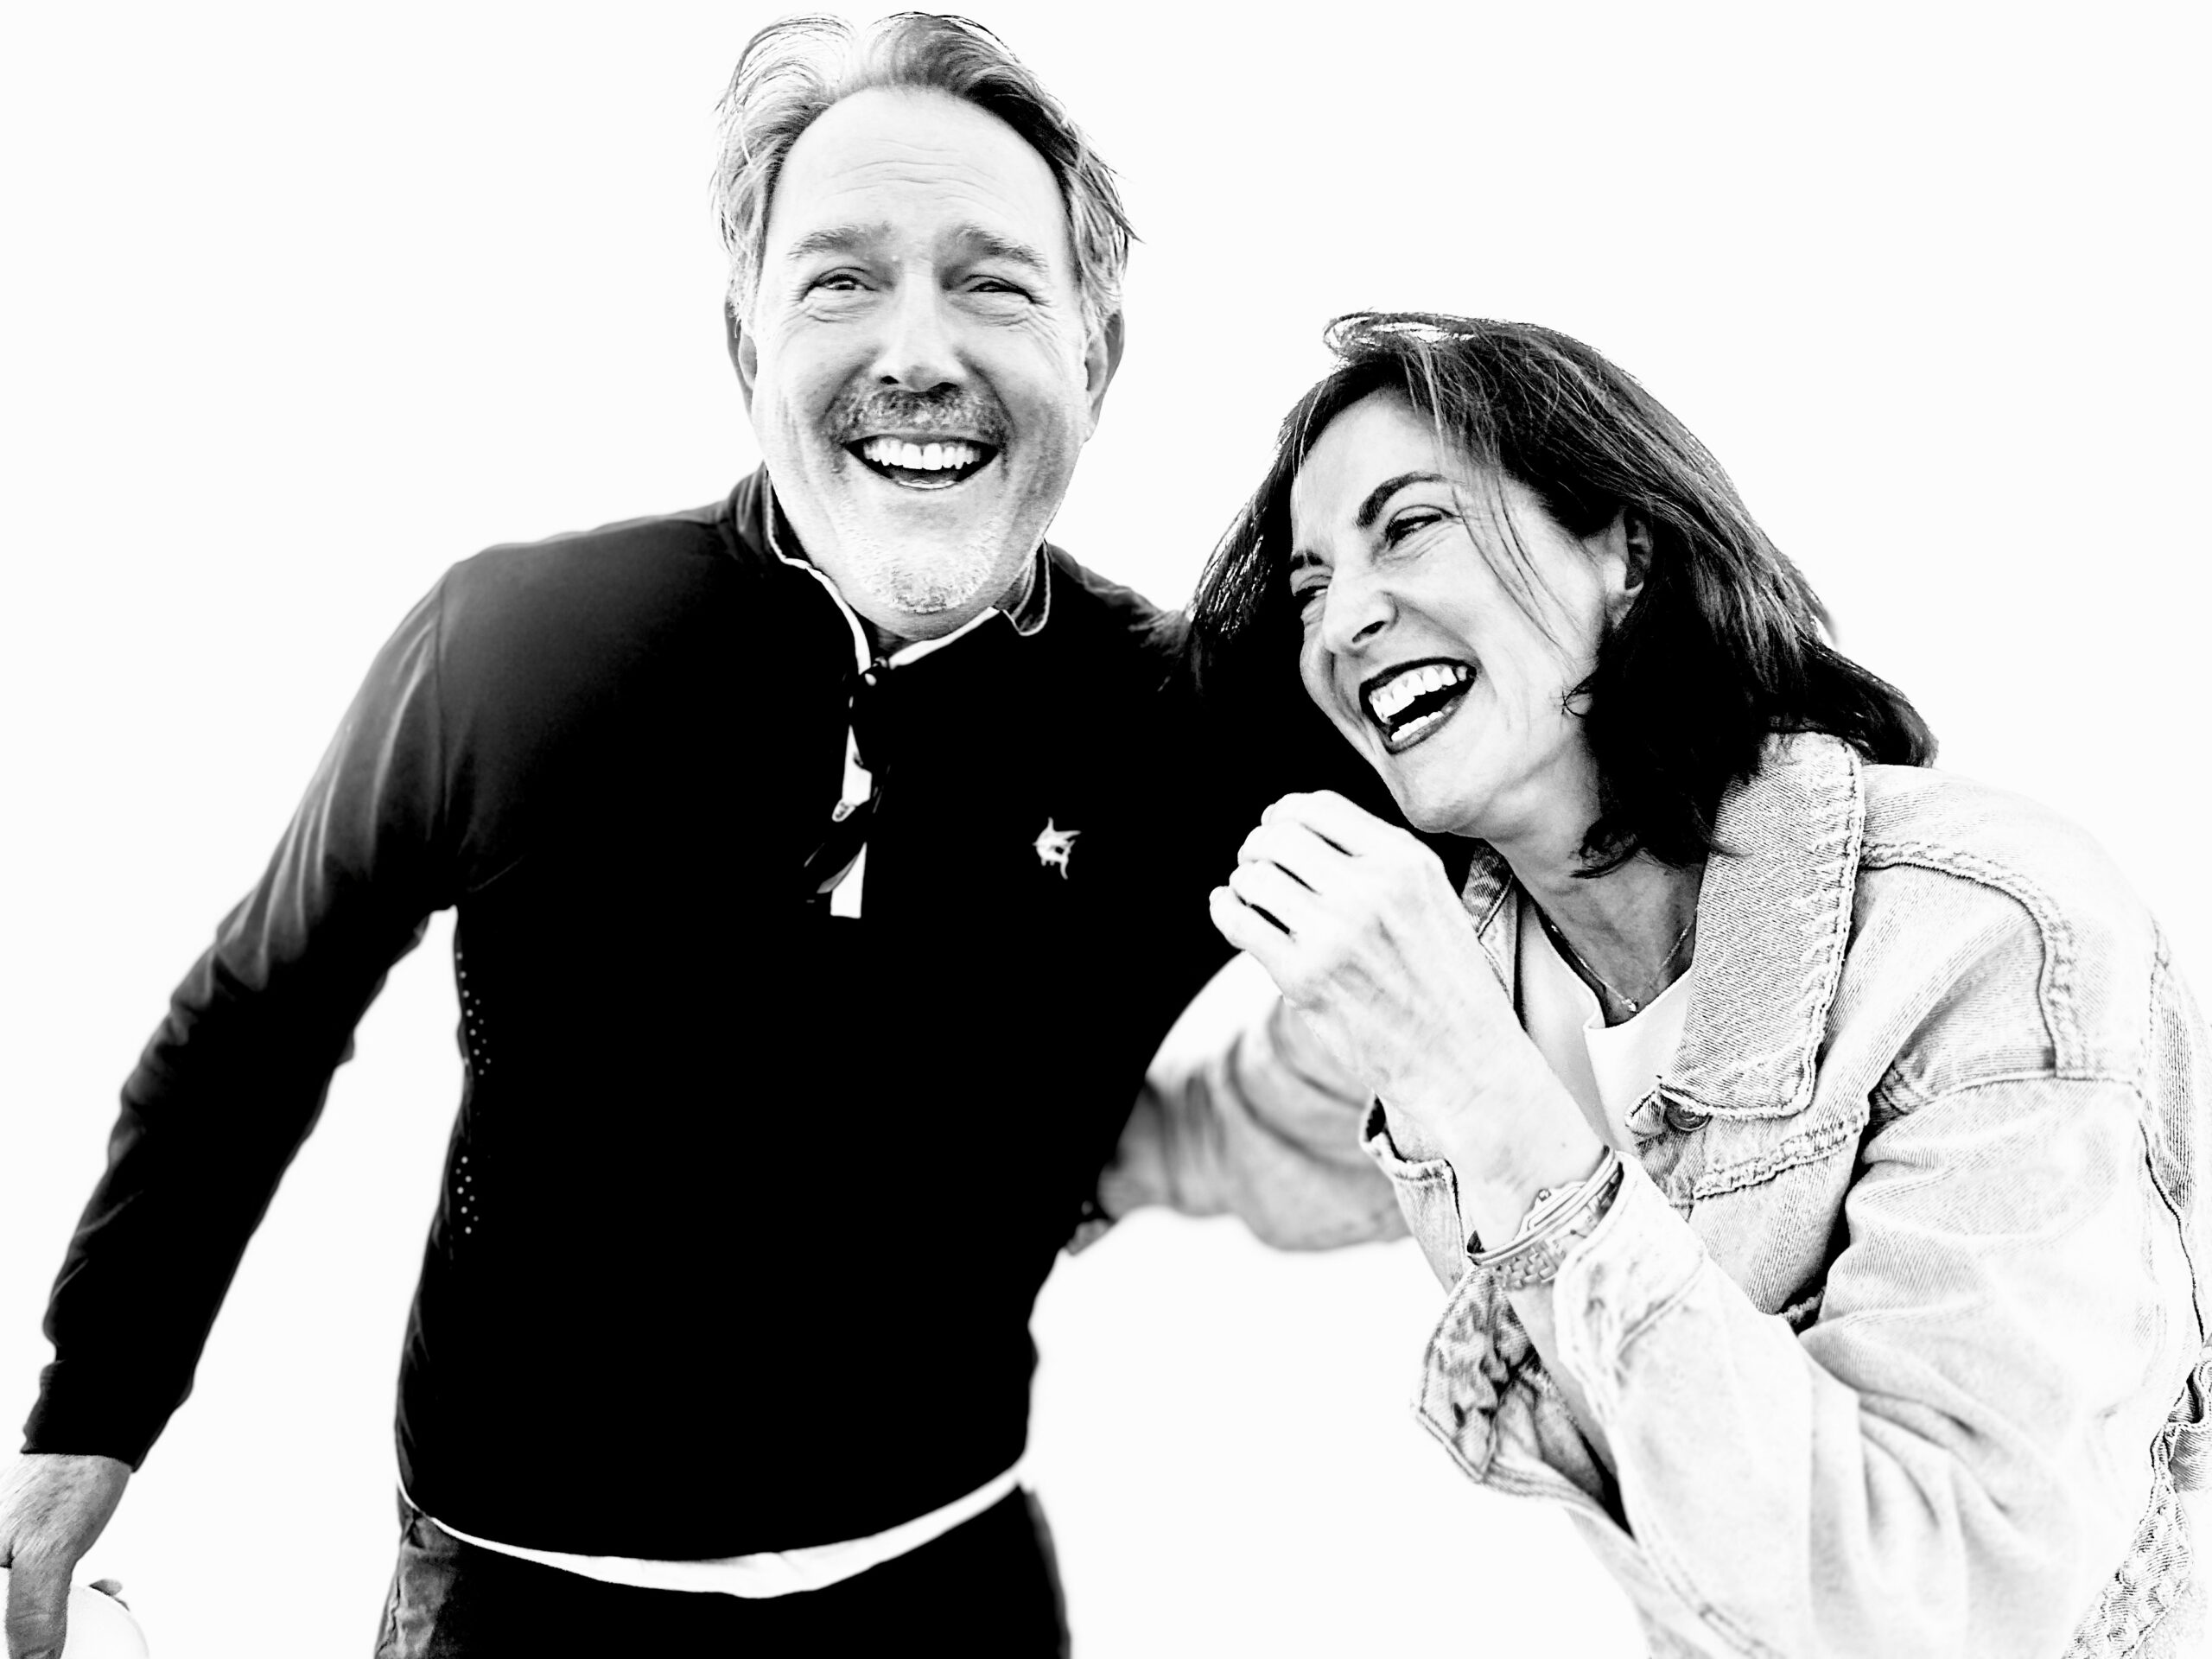 A black and white photo of a man and woman laughing.